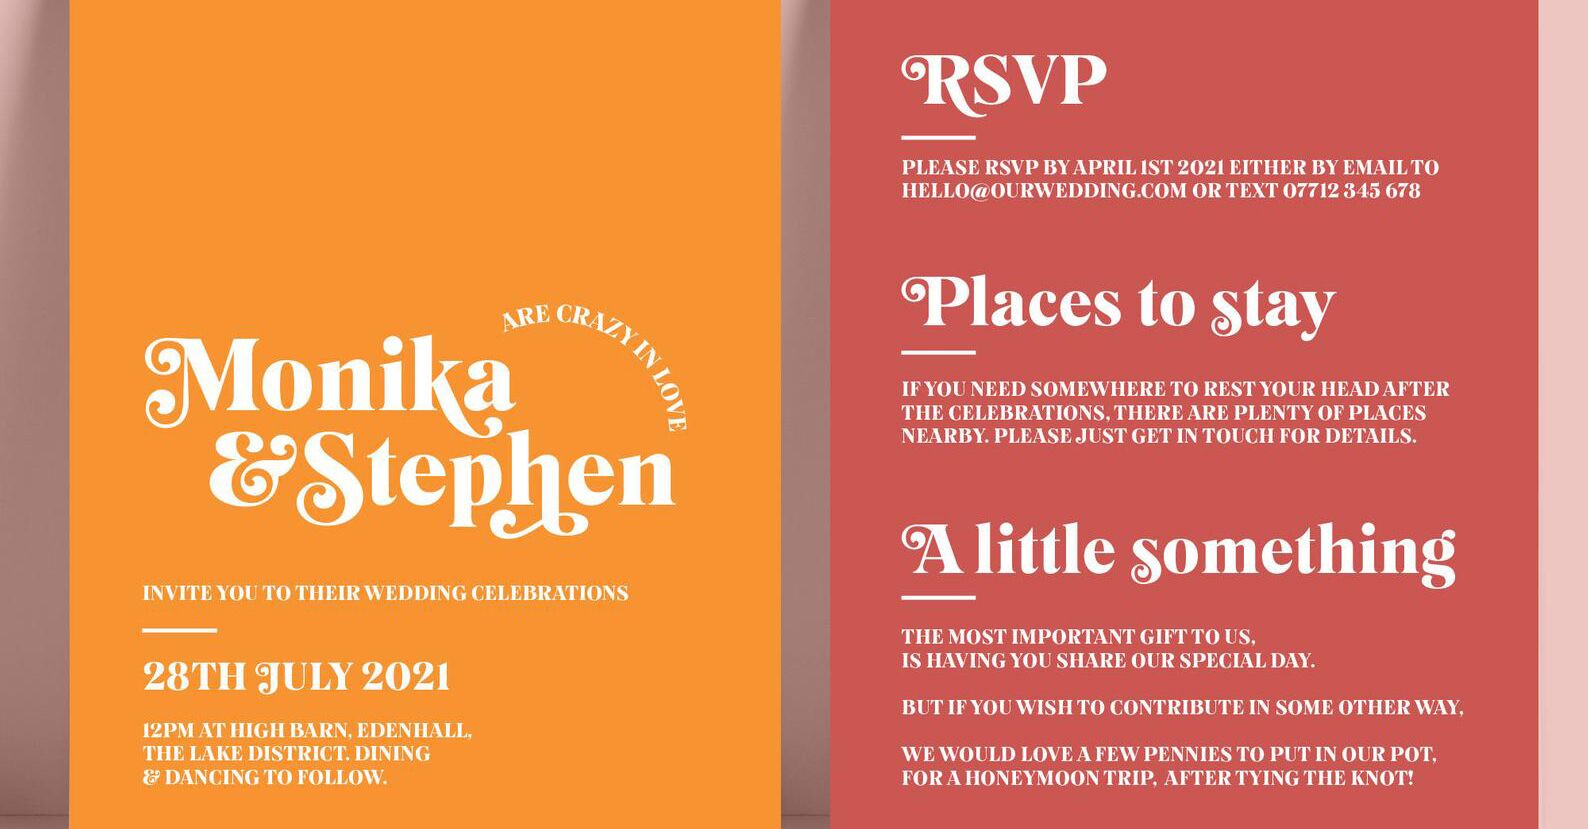 20 Unique Wedding Invitations That'll Stand Out In The Mail